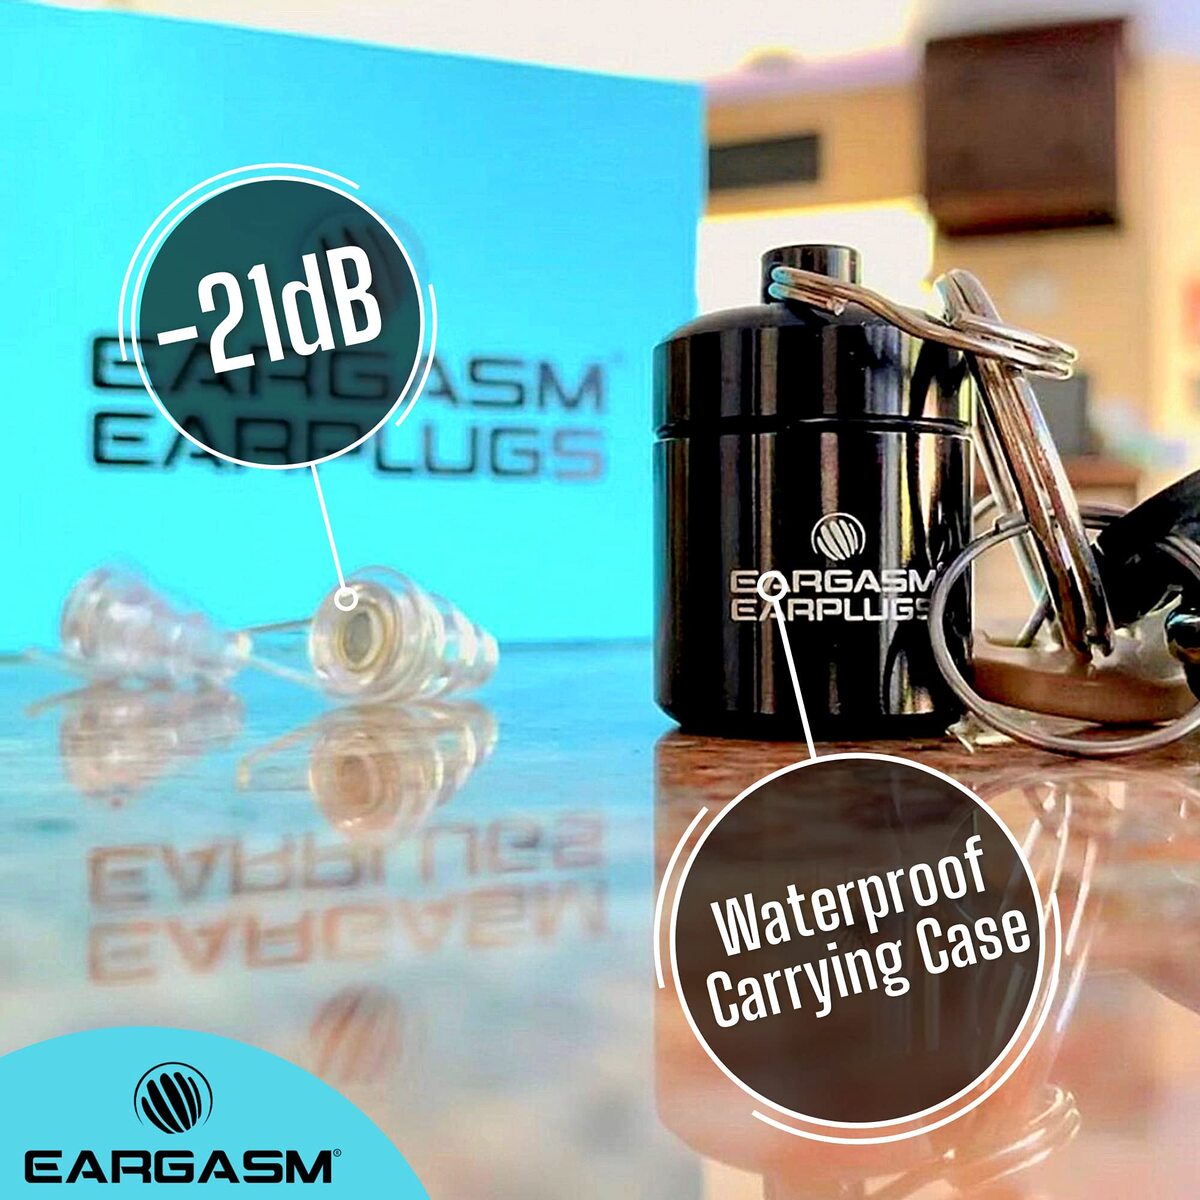 EARGASM HIGH FIDELITY EARPLUGS - SMALLER EARS OR STANDARD SIZE - TRANSPARENT EDITION